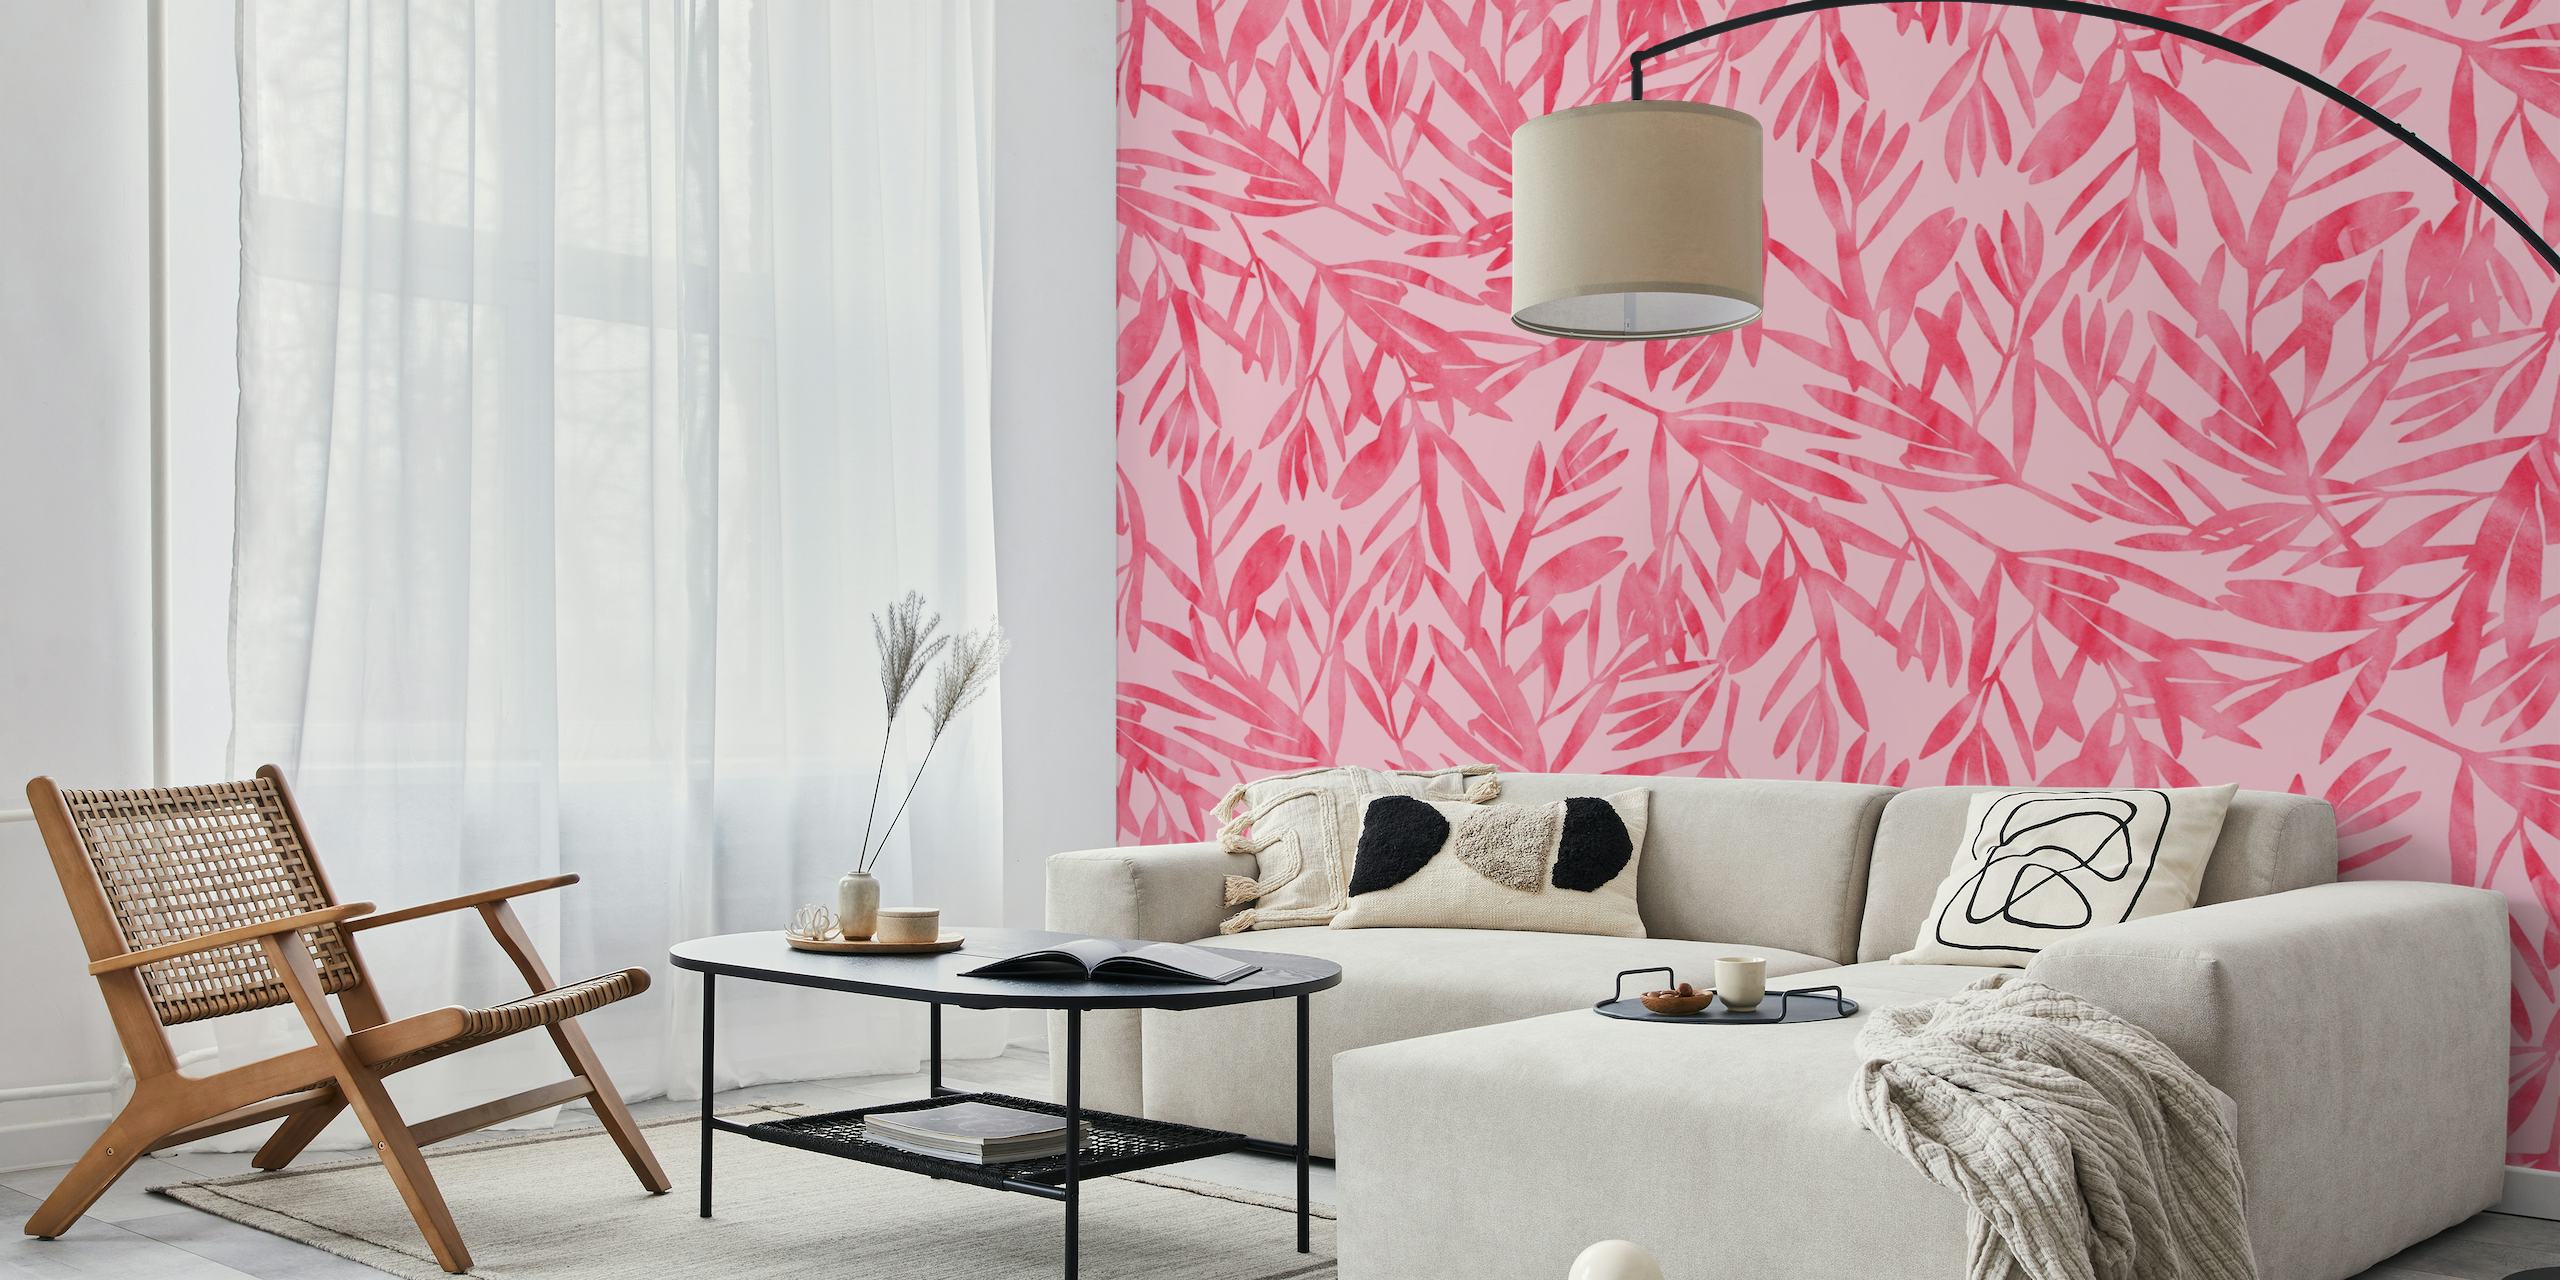 Abstract pink leaves pattern on wall mural